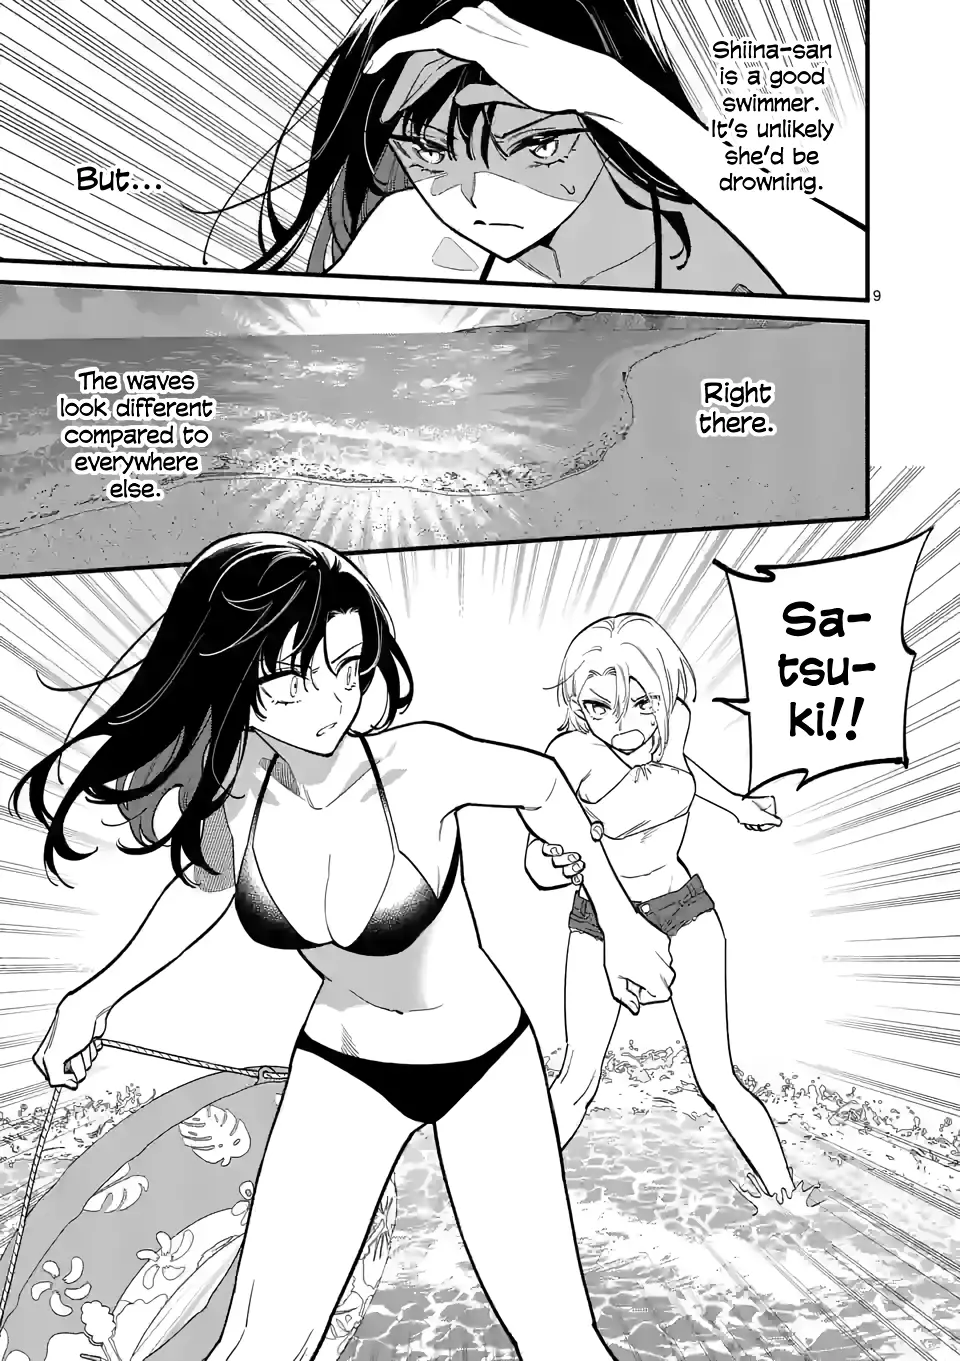 Liar Satsuki Can See Death - 55 page 9-8c7068ce